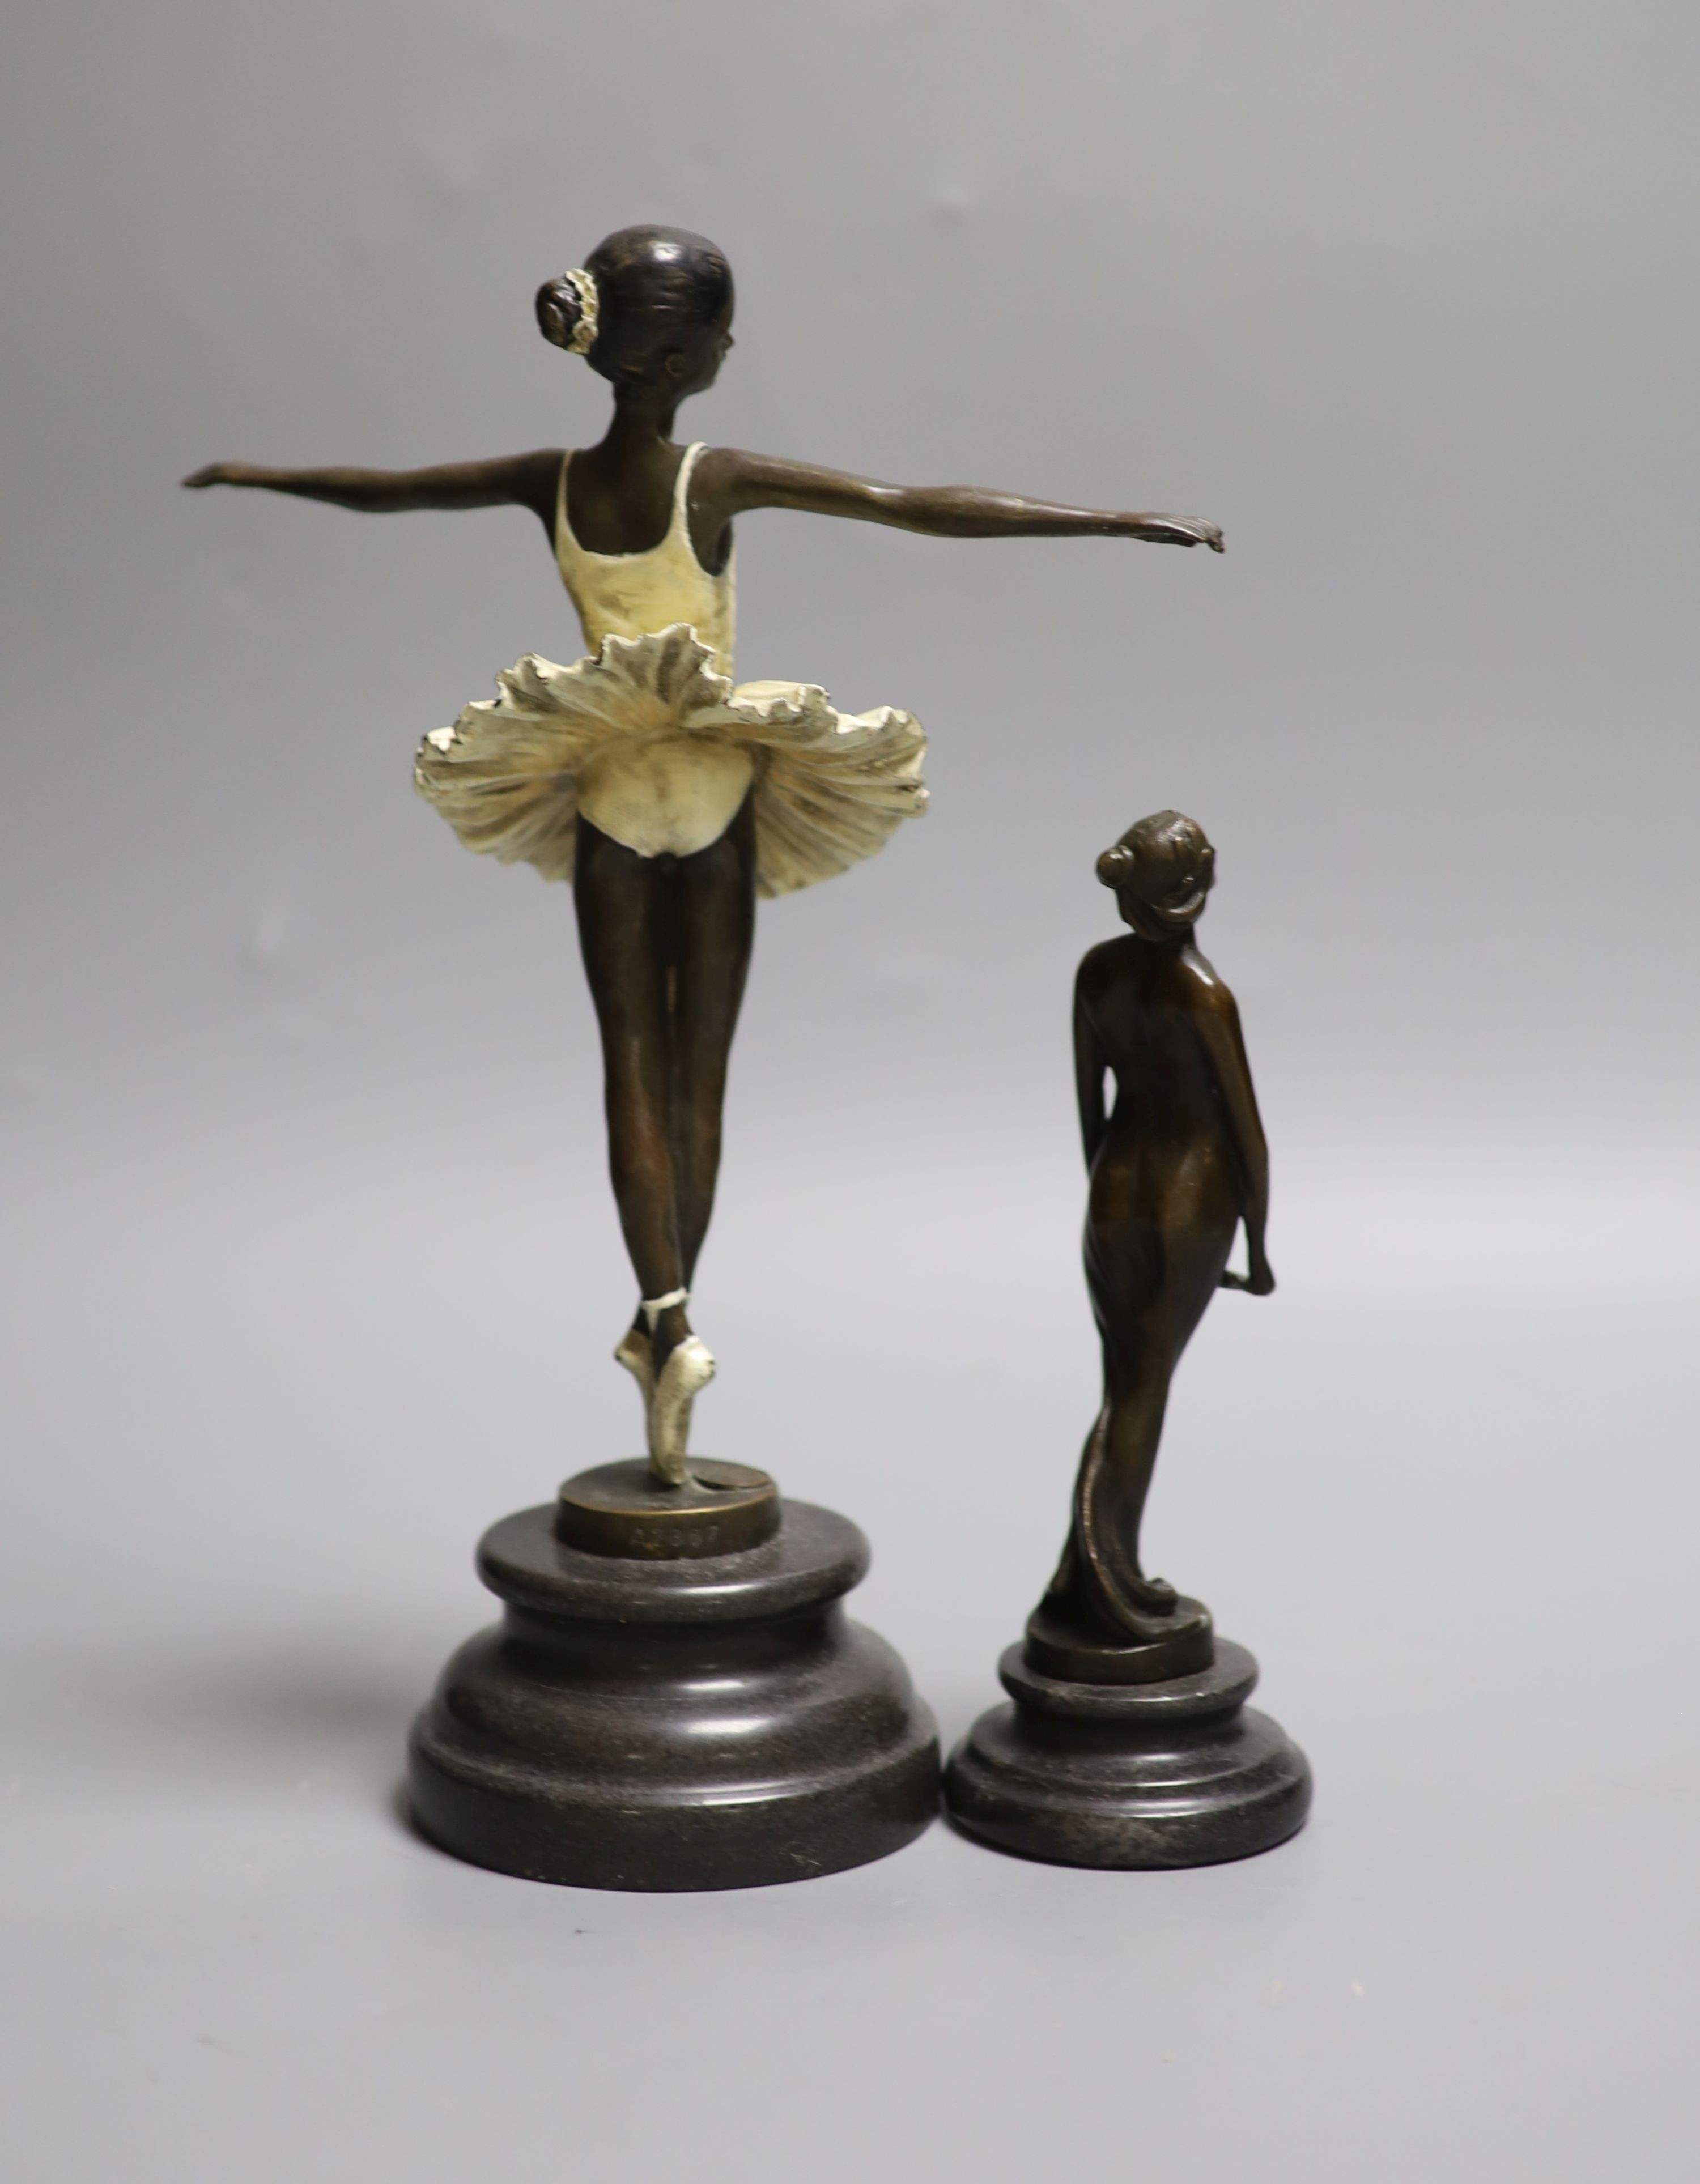 Two bronze figures of a ballerina and a nude maiden